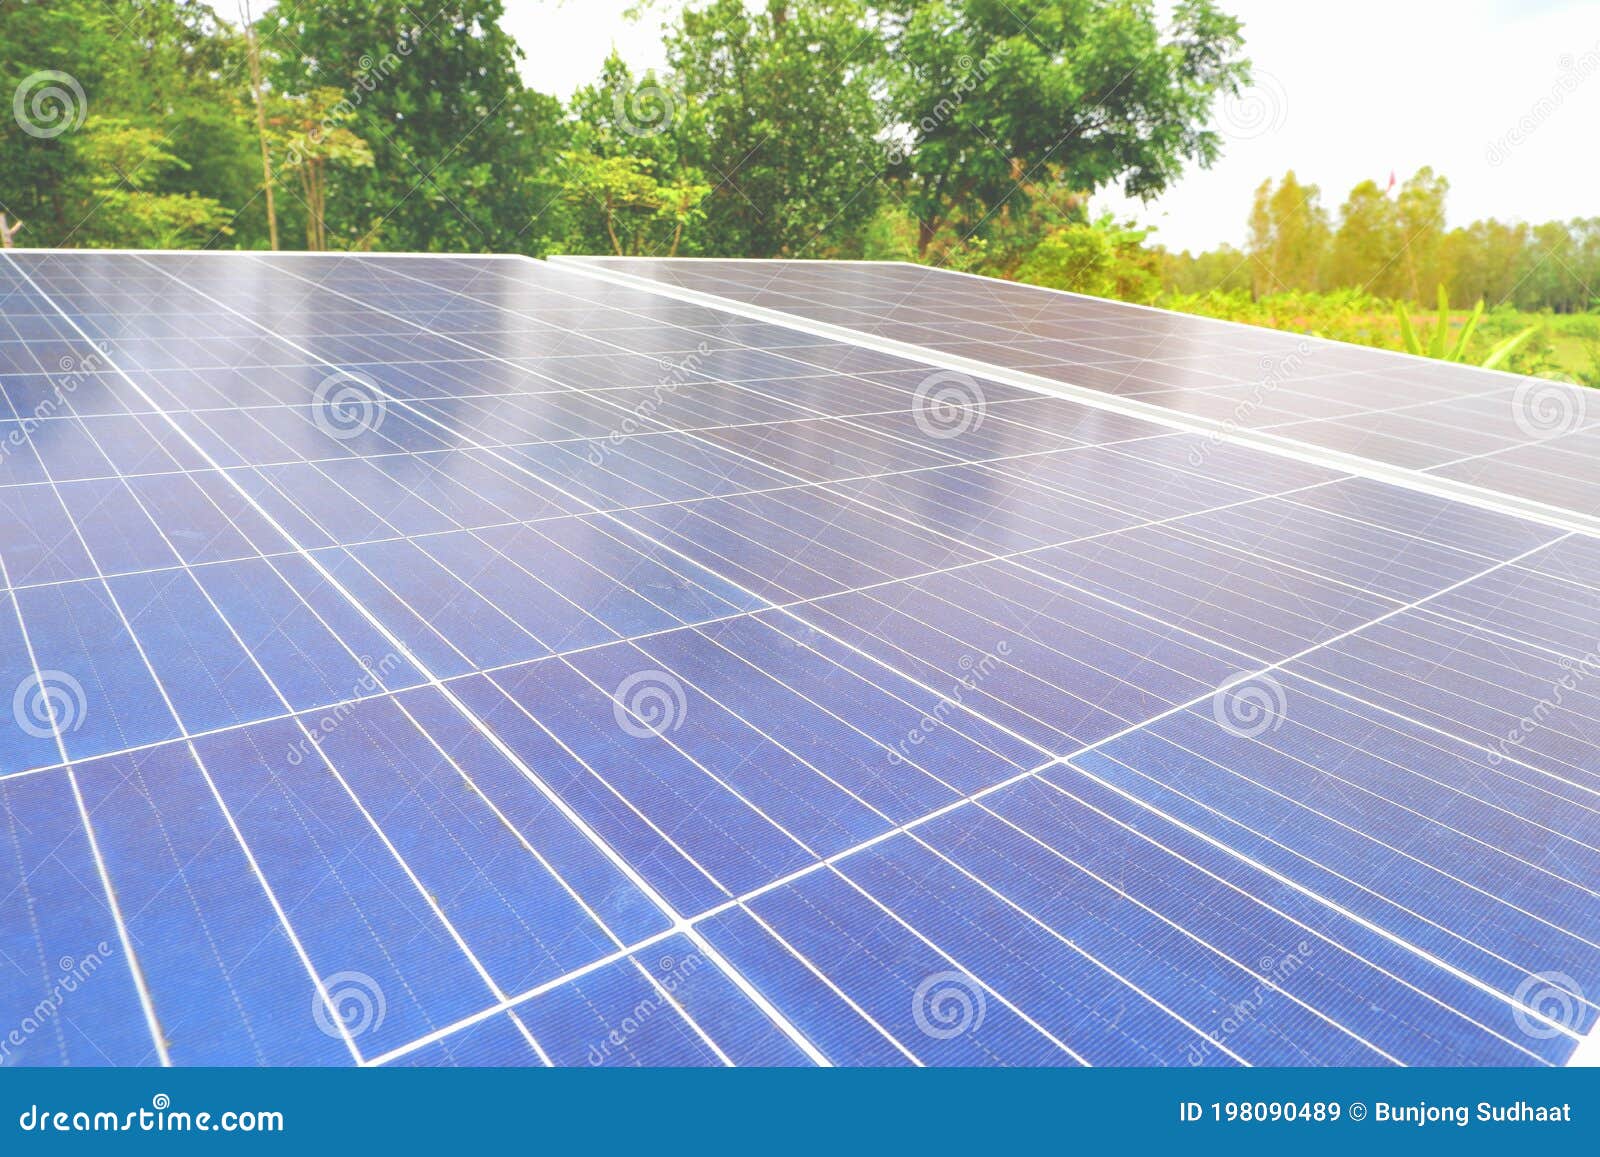 solar panal for generation free power from natural.